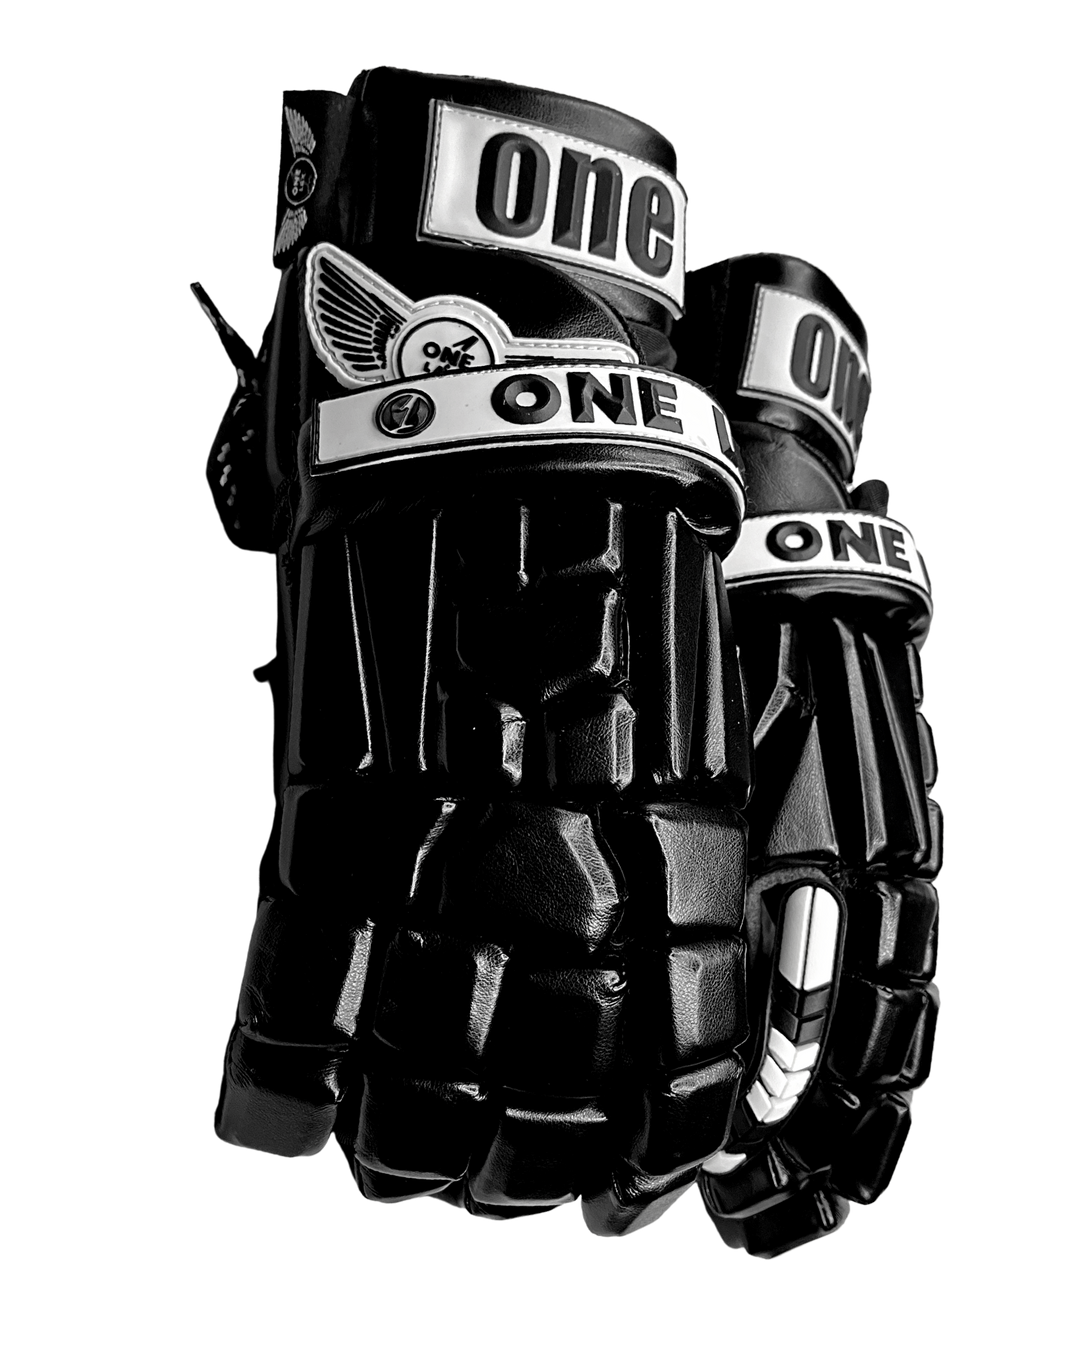 1 Gloves in Black | 4 Sizes Available | HYBRID Box & Field Lacrosse Gloves - One Lax